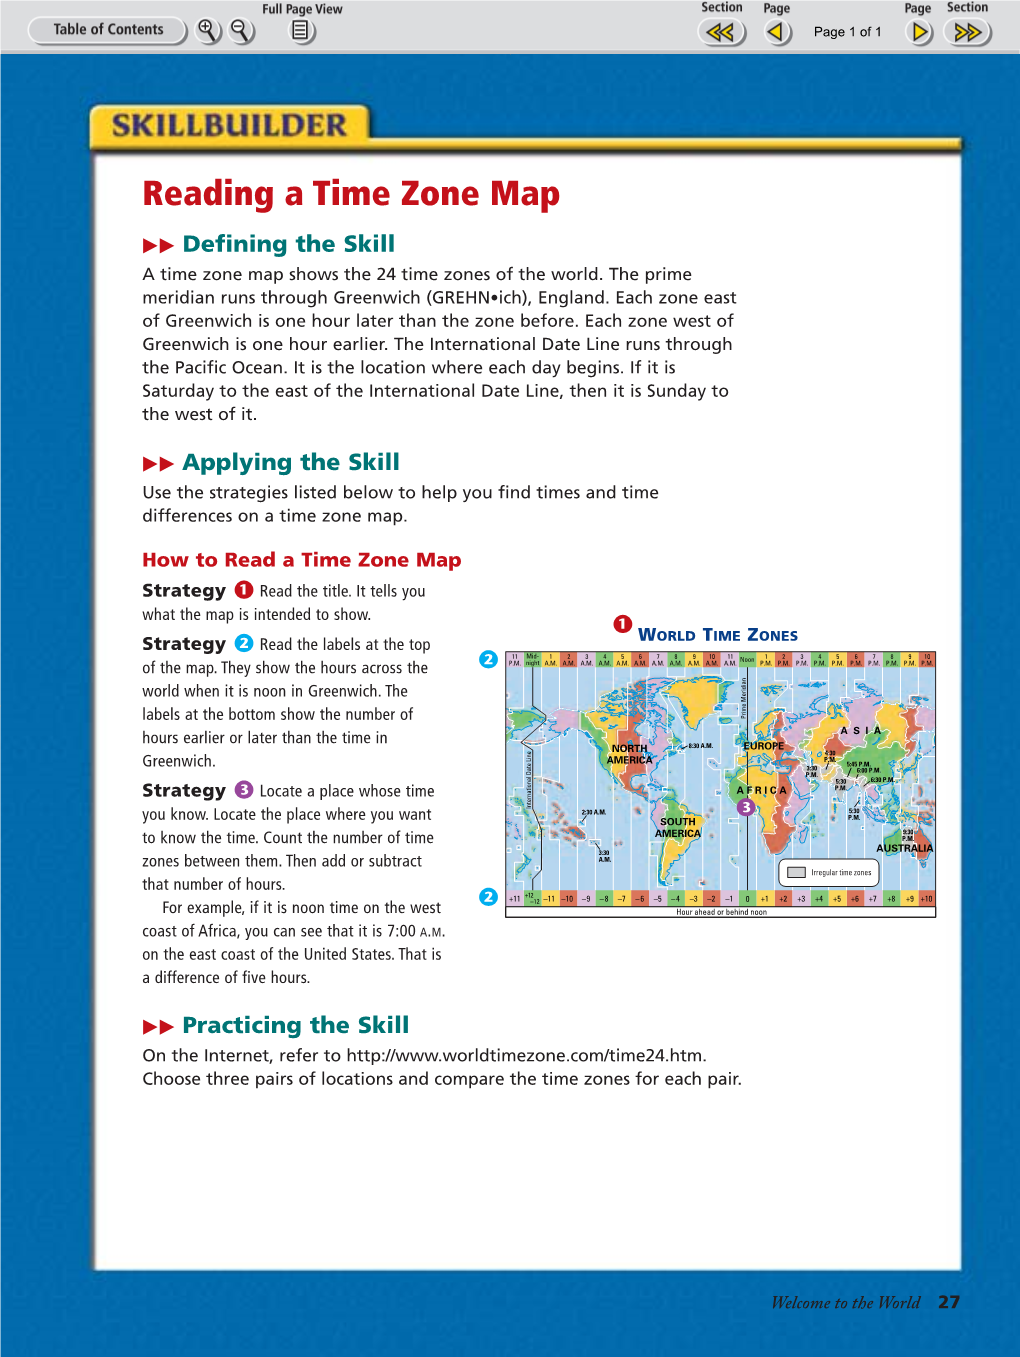 Reading a Time Zone Map